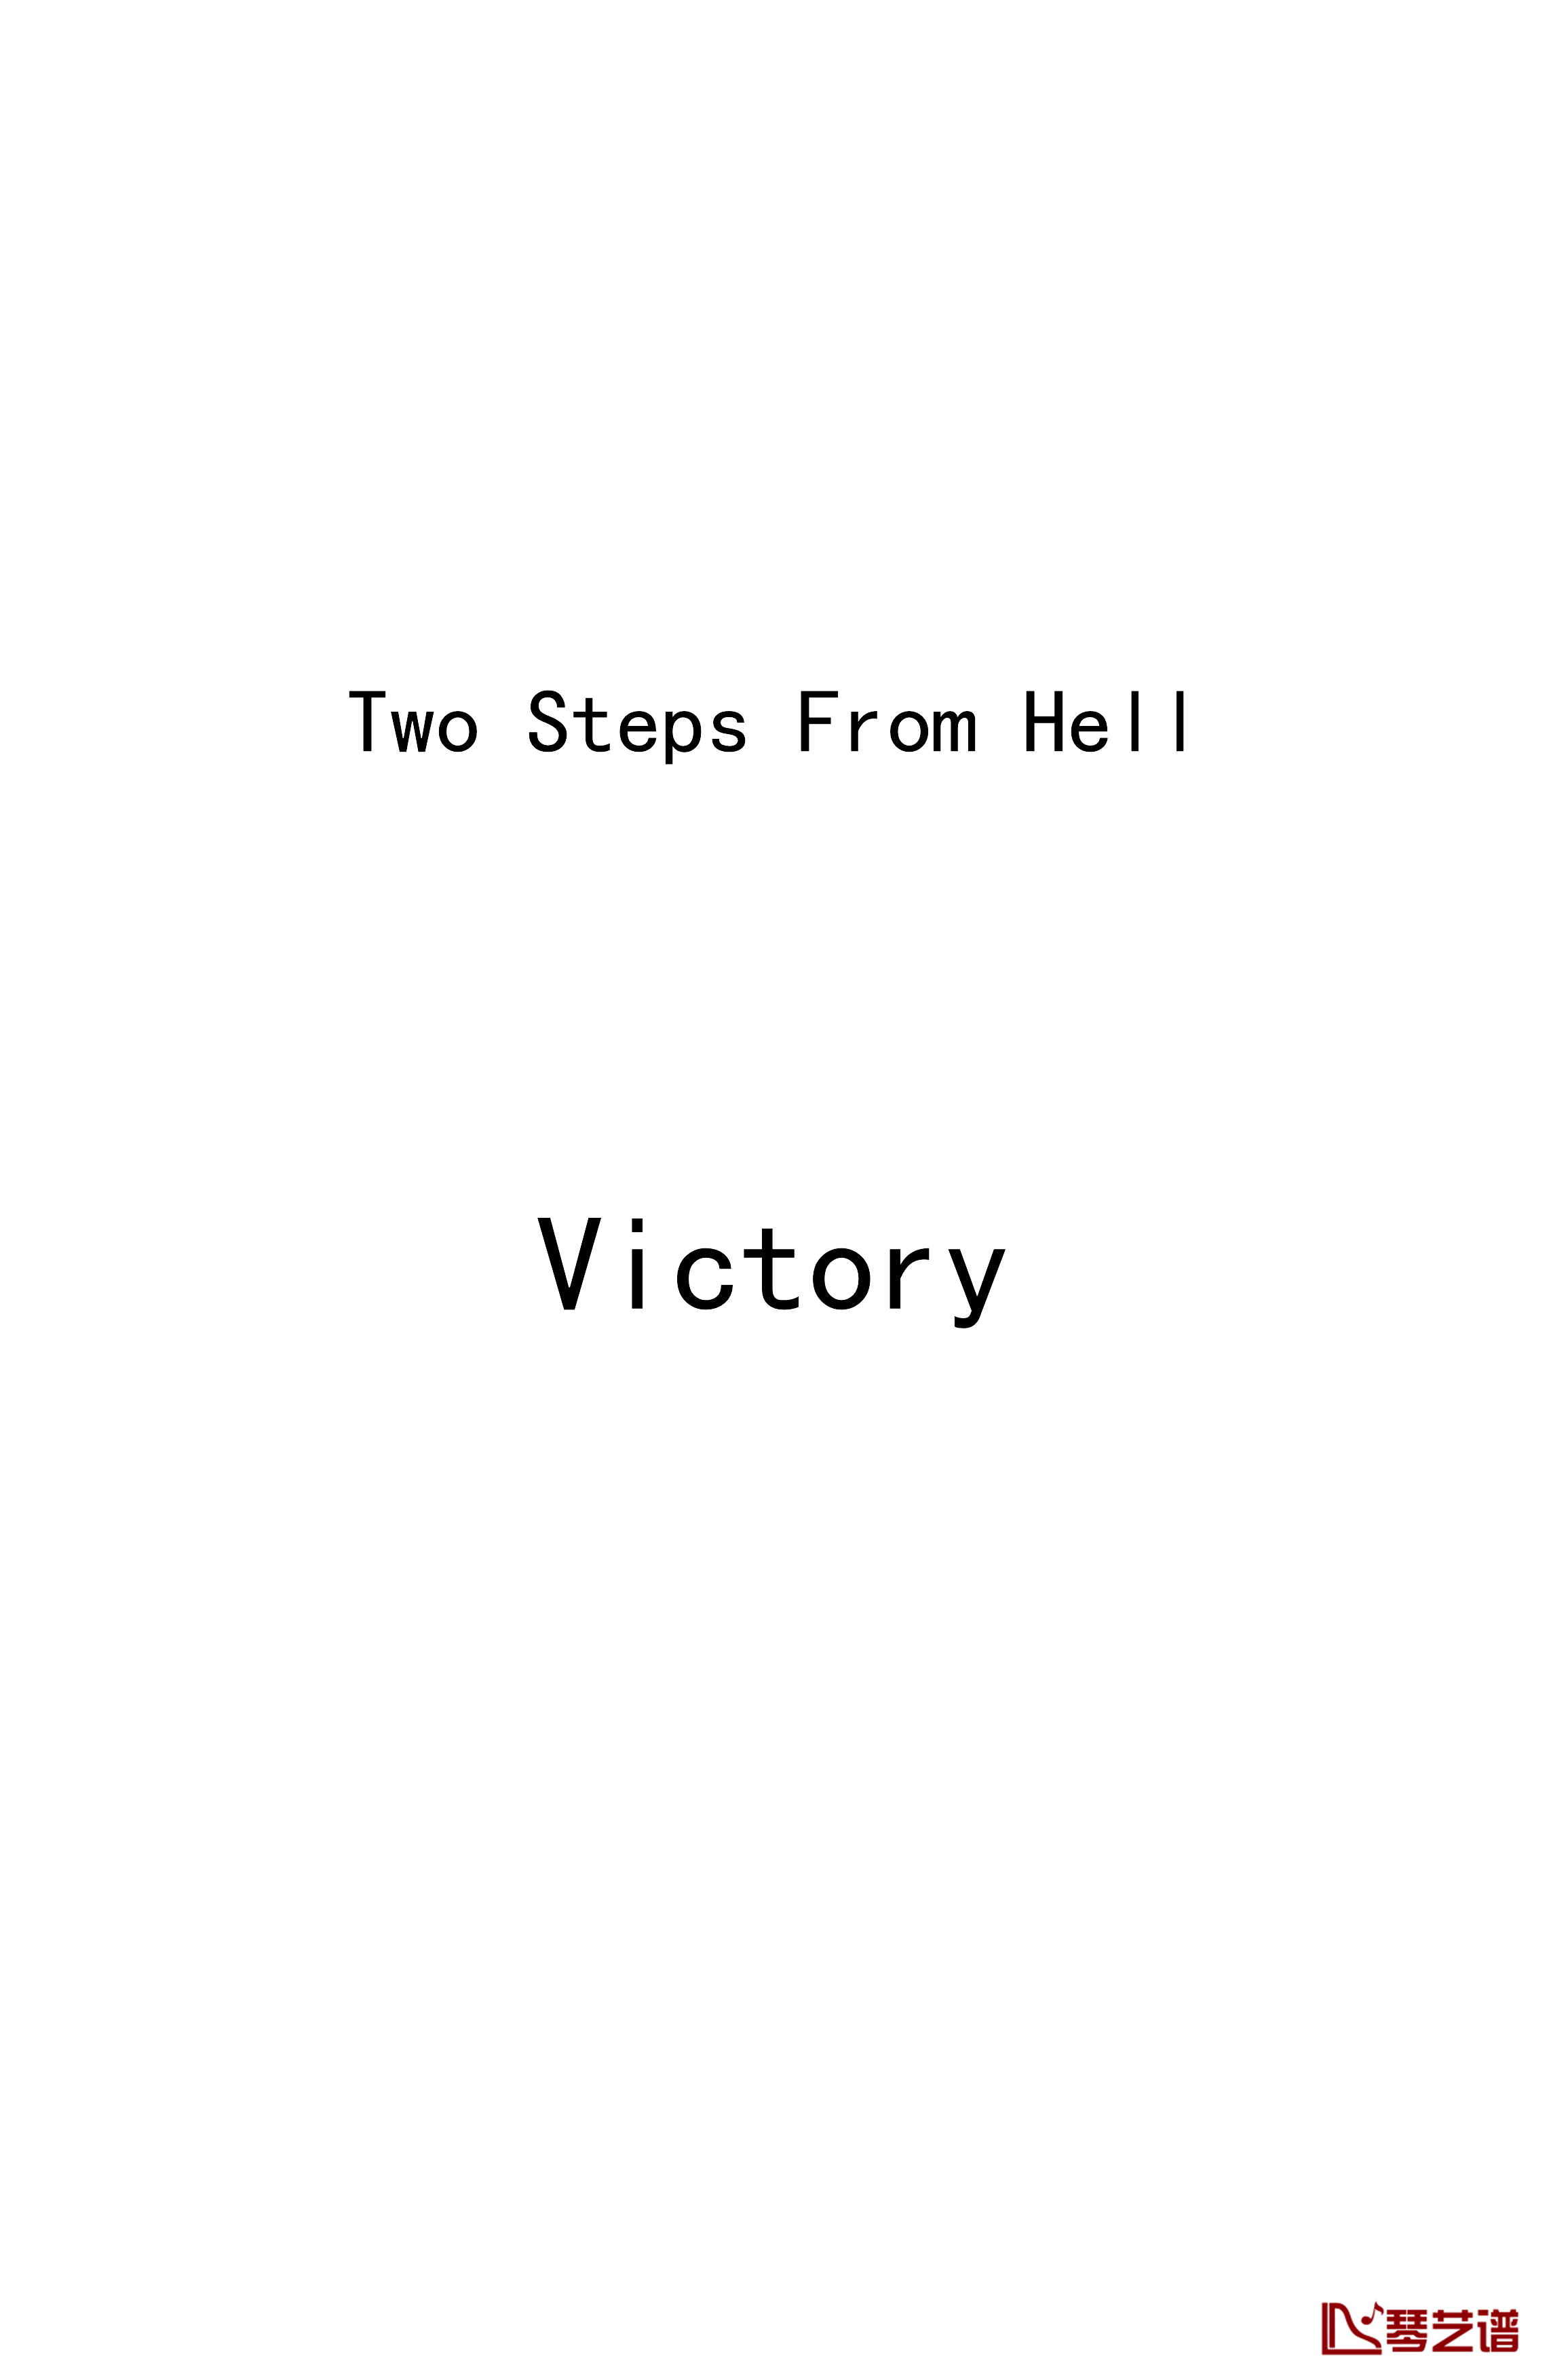 Victory钢琴谱-Two Steps From Hell1